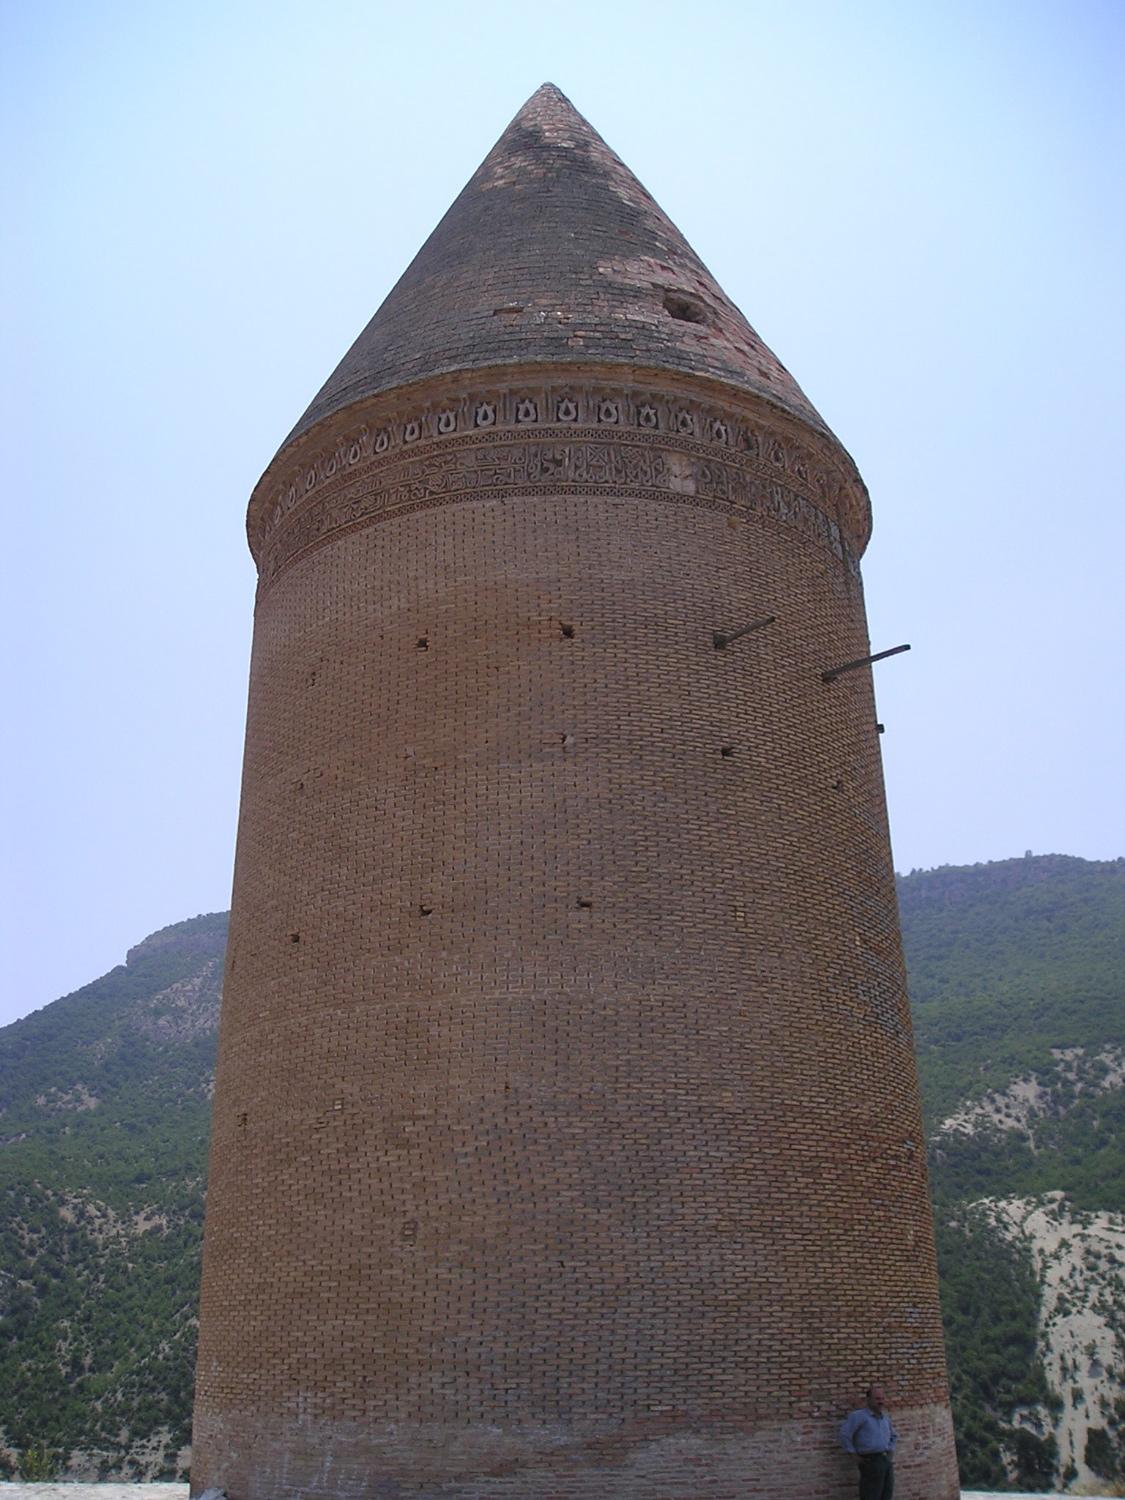 Exterior view showing decorative bands below conical dome